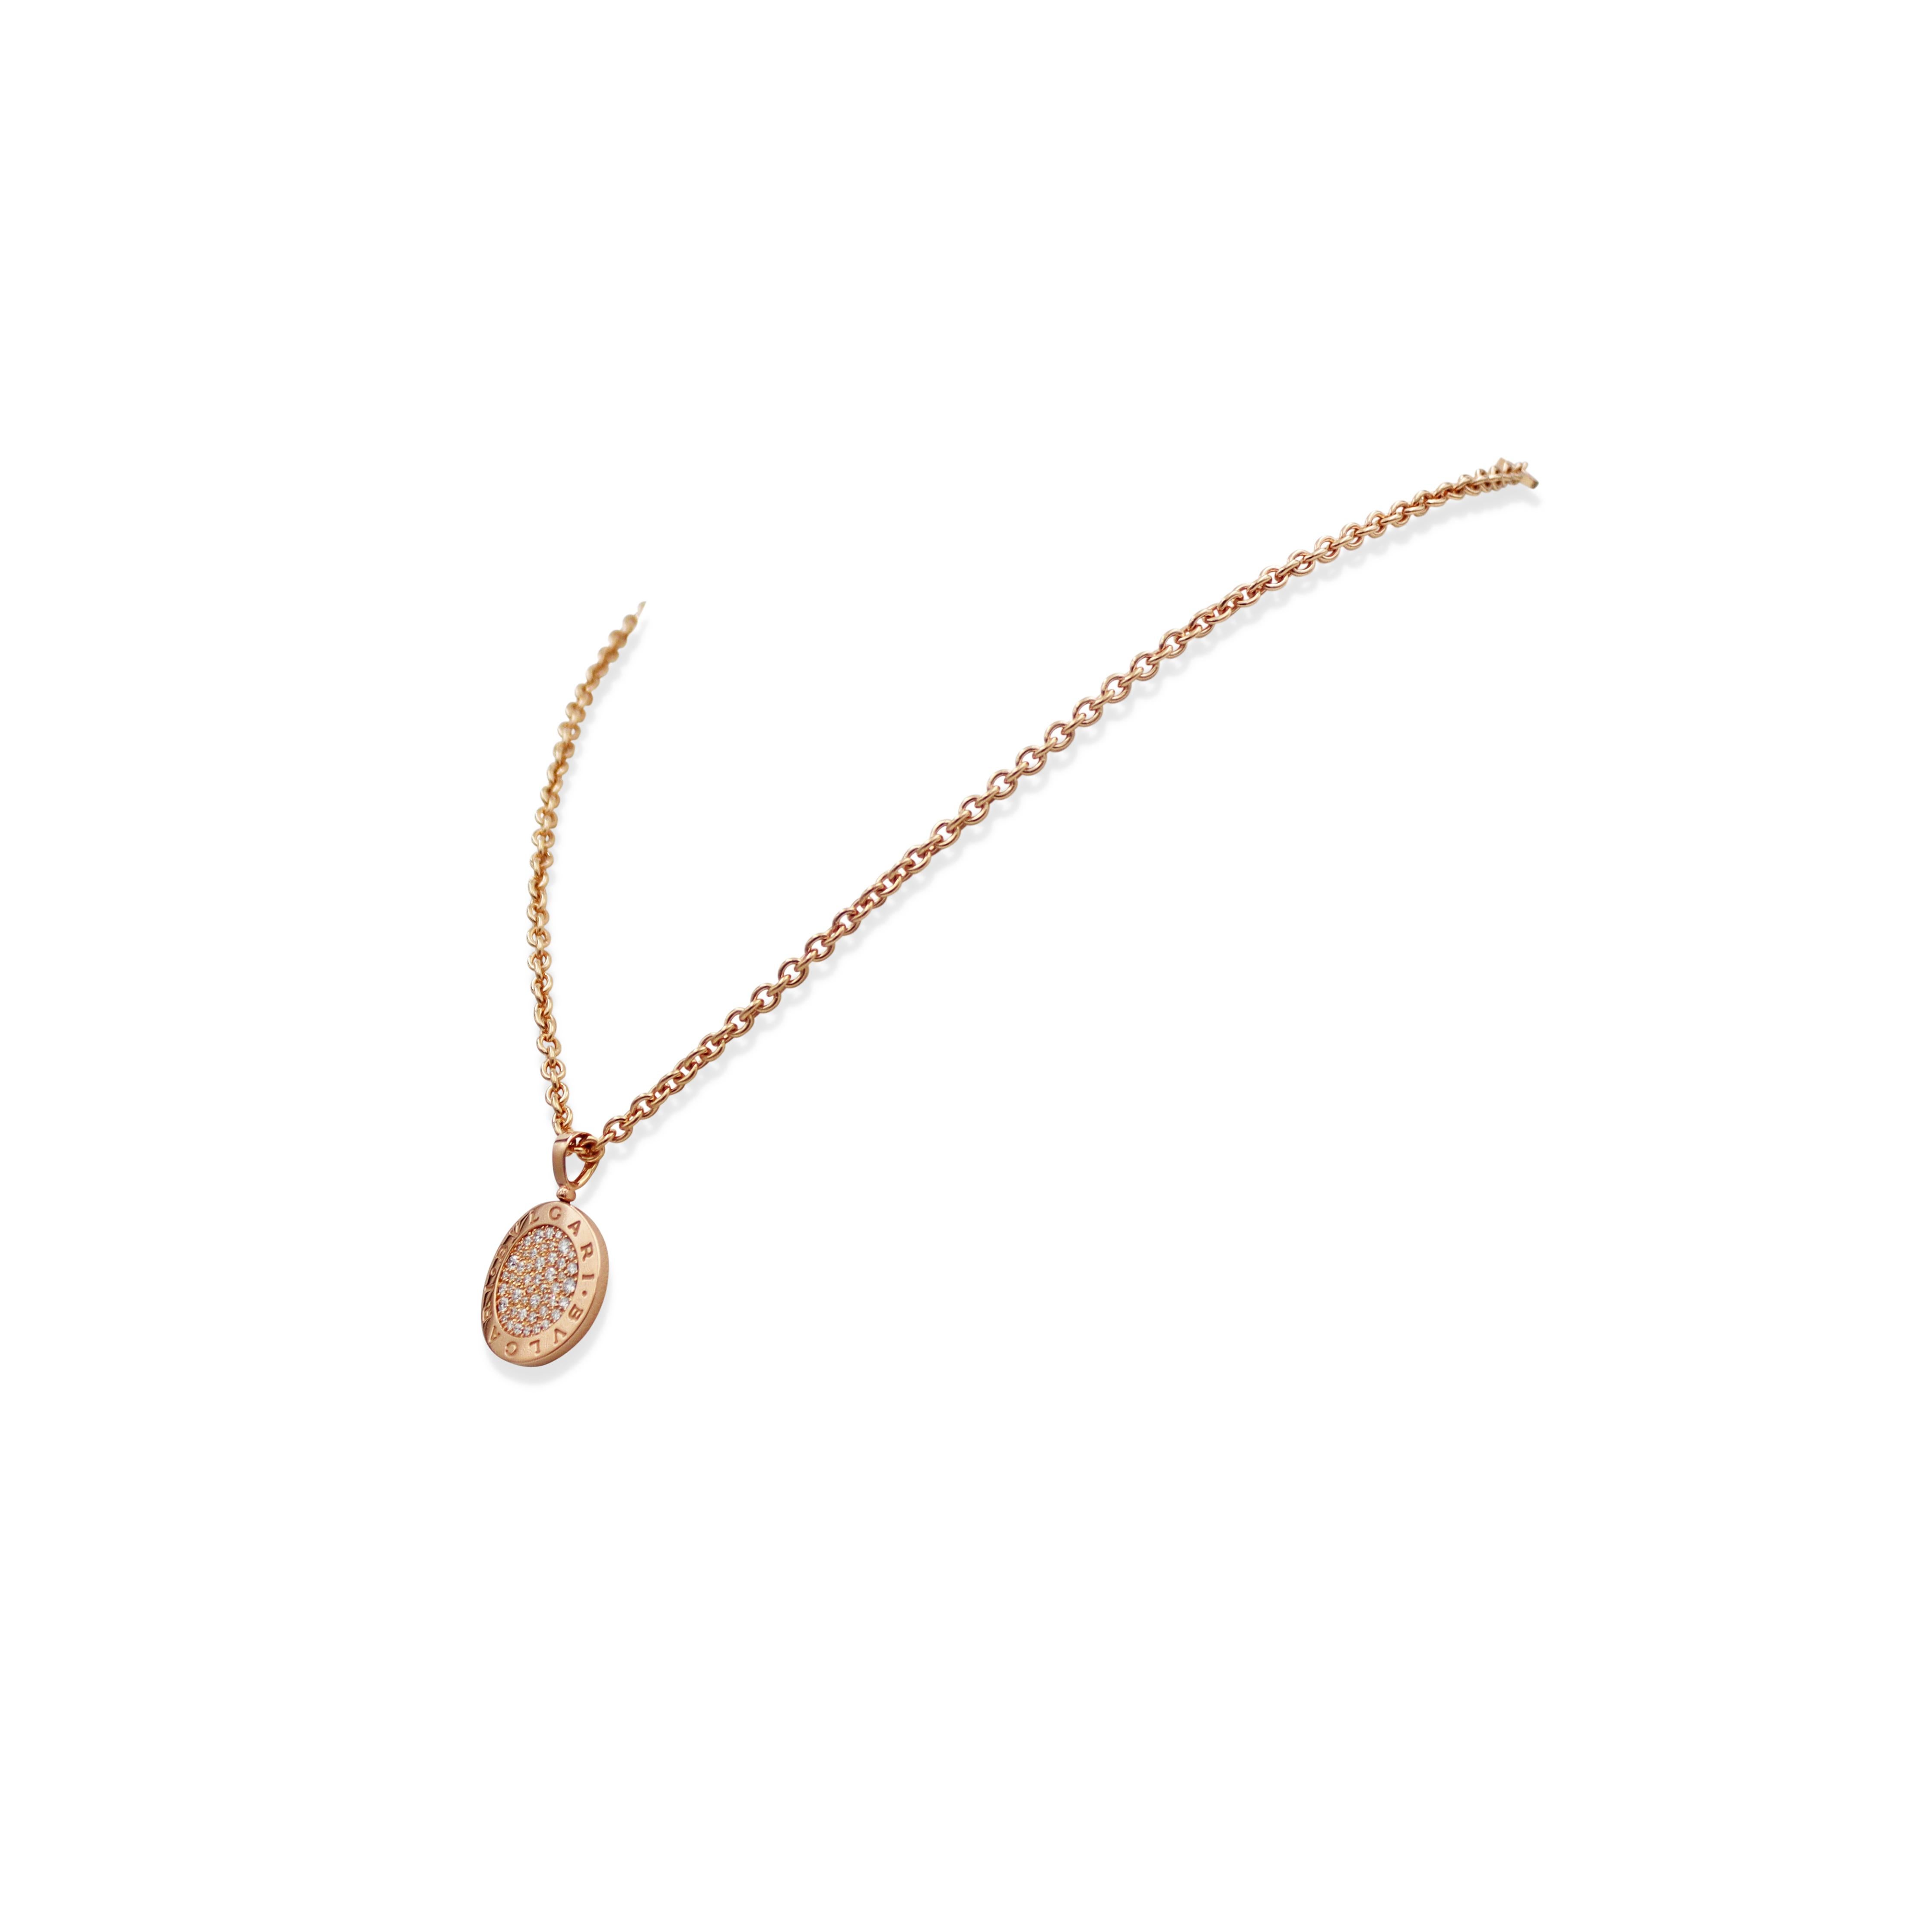 Authentic Bvlgari pendant necklace crafted in 18 karat rose gold. The curved disc-shaped pendant features Bvlgari's trademark double logo and is set at the center with an estimated 1.00 carats of pavé round brilliant cut diamonds and hangs from an